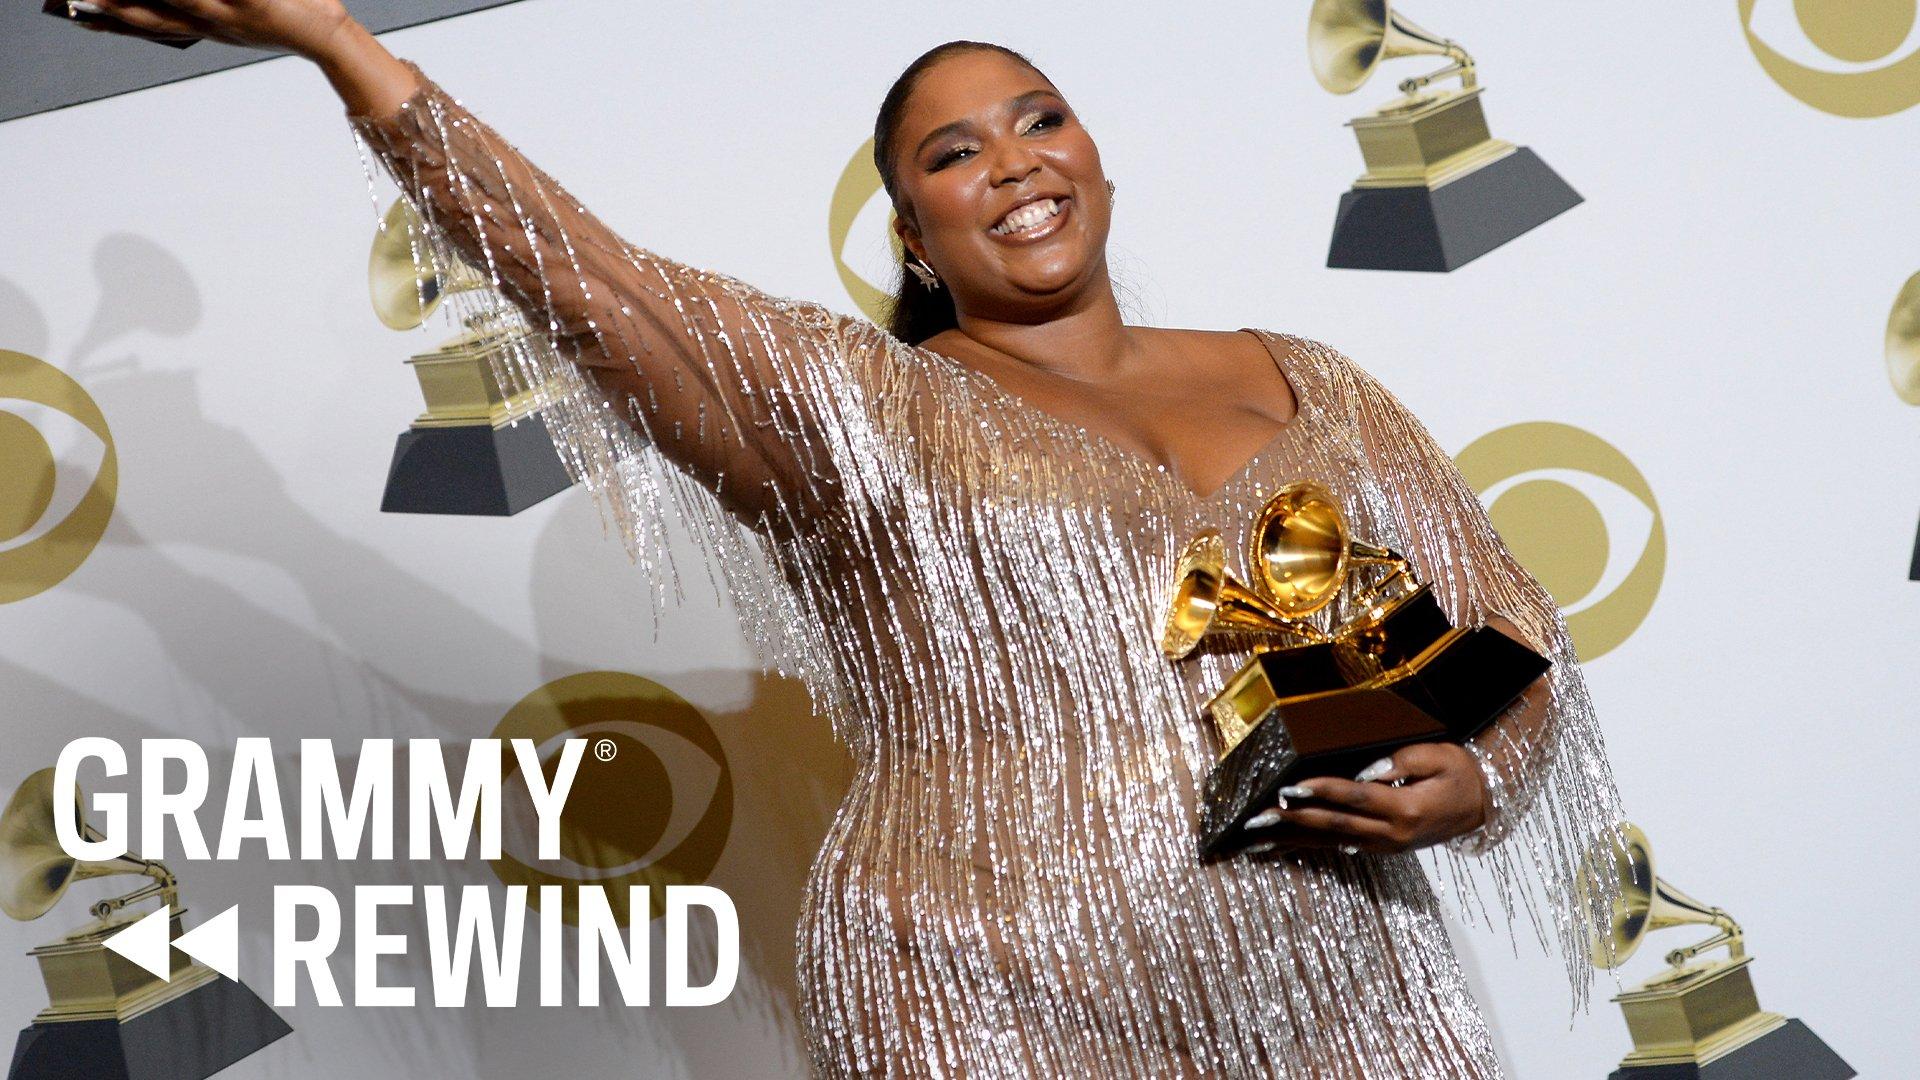 Watch Lizzo Win A GRAMMY For "Truth Hurts" In 2020